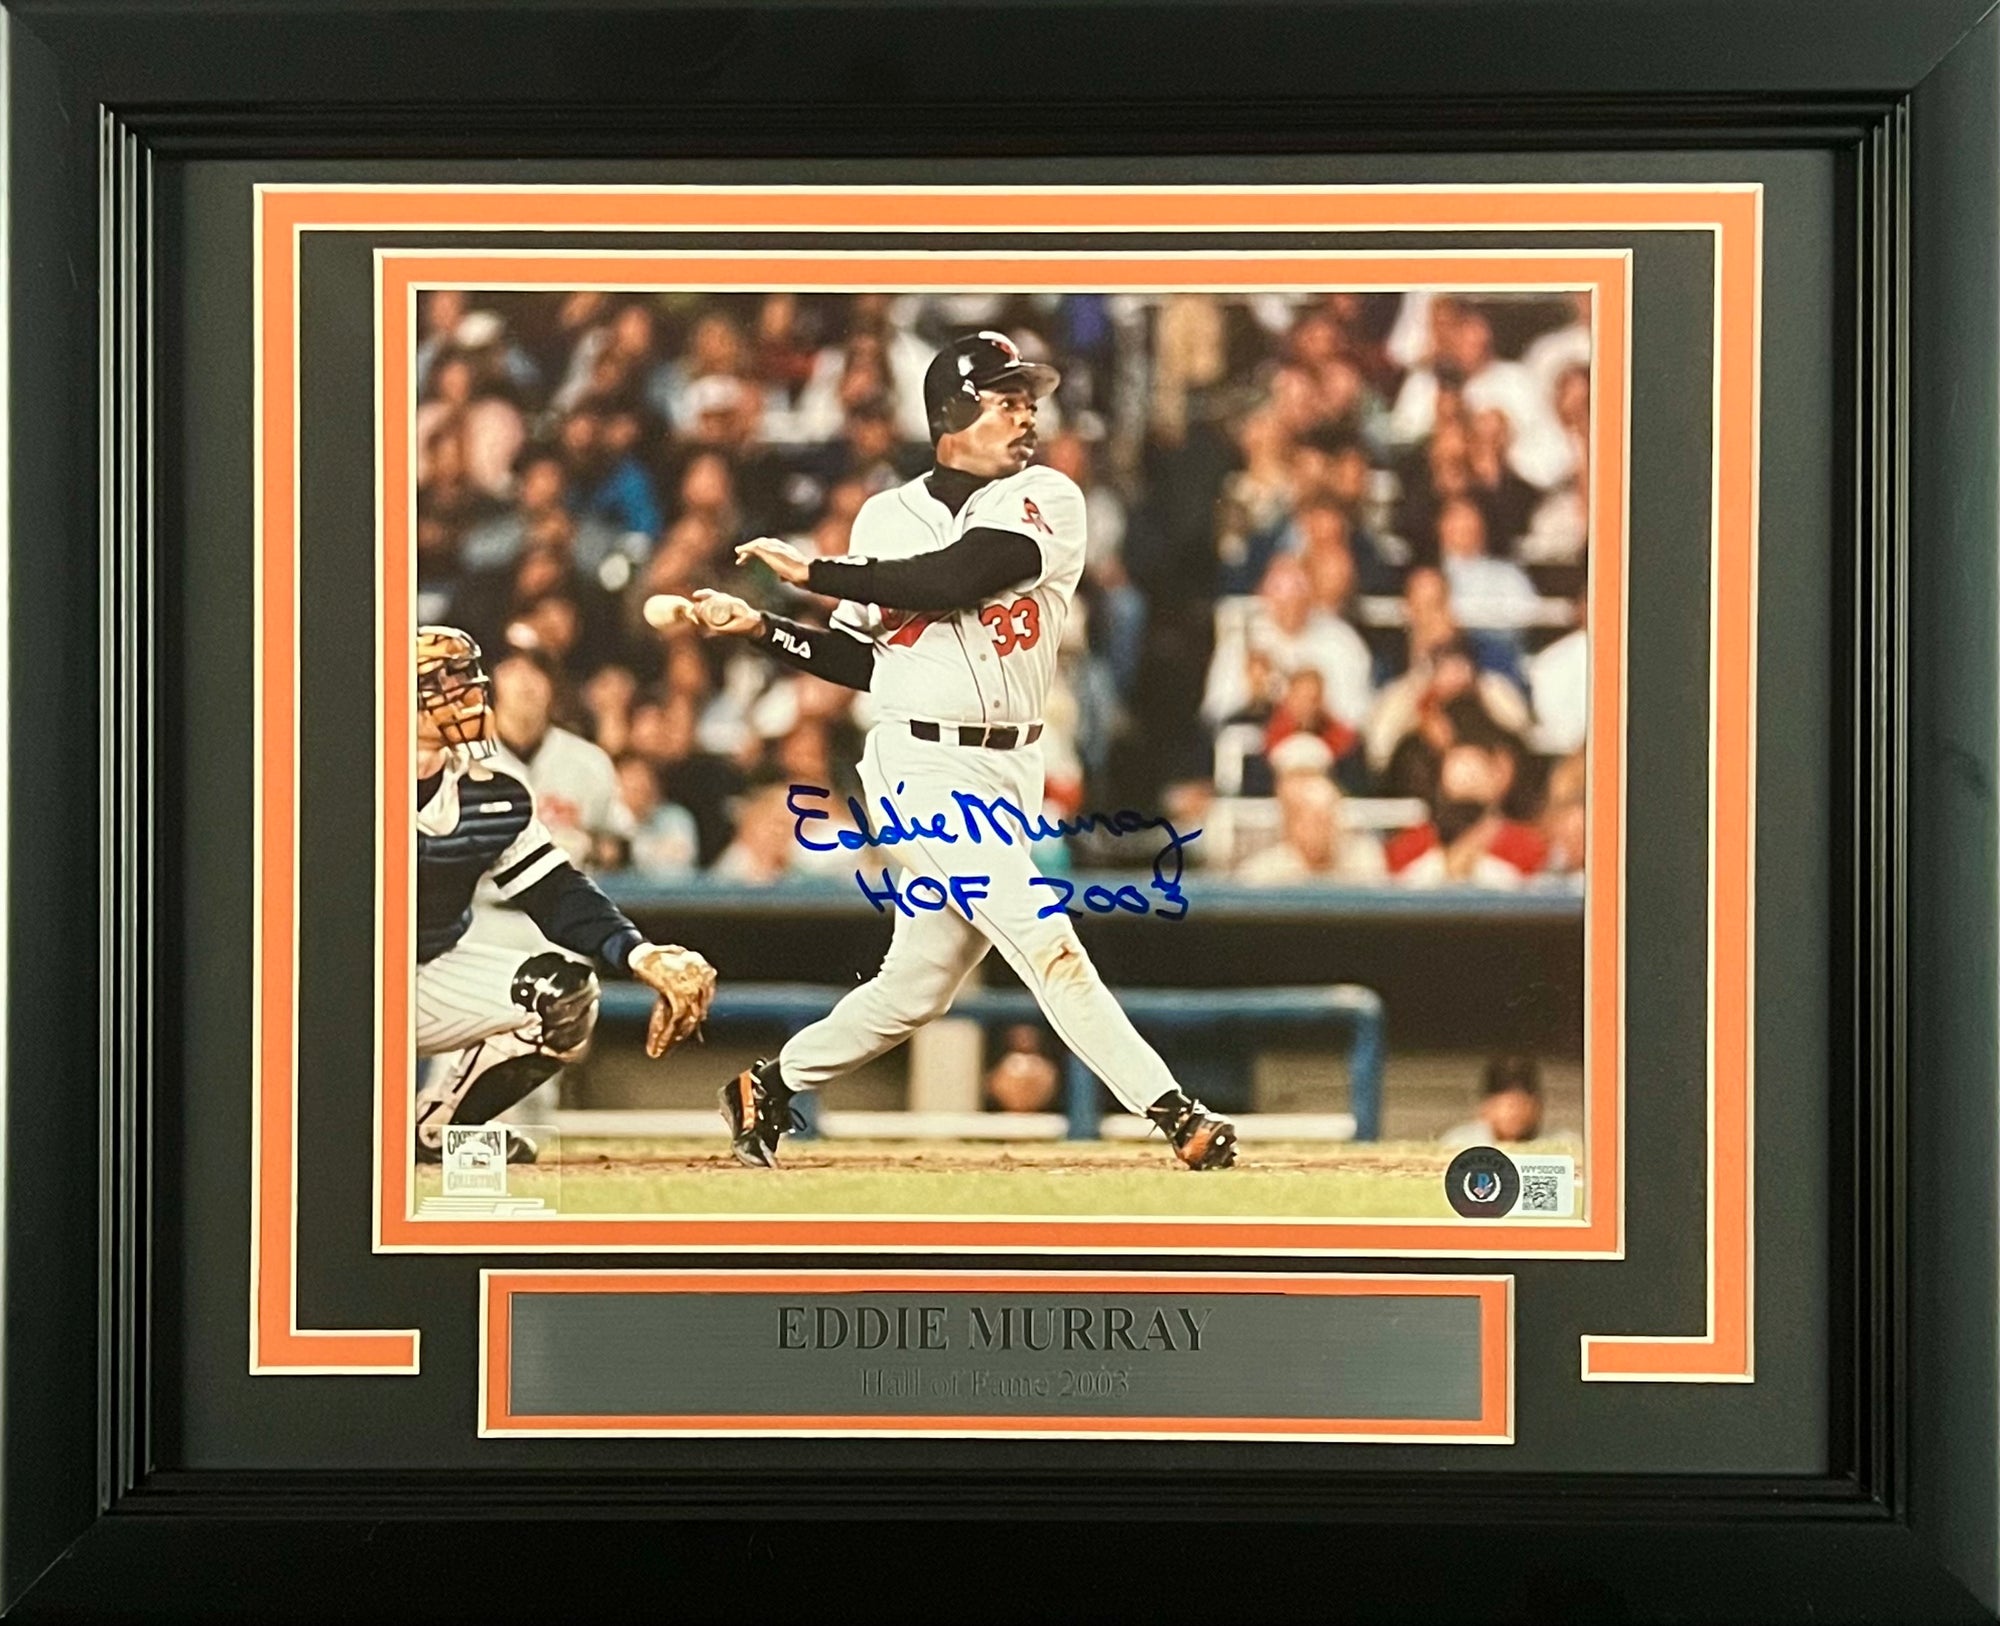 Eddie Murray Baltimore Orioles Autographed 8x10 Photo Framed